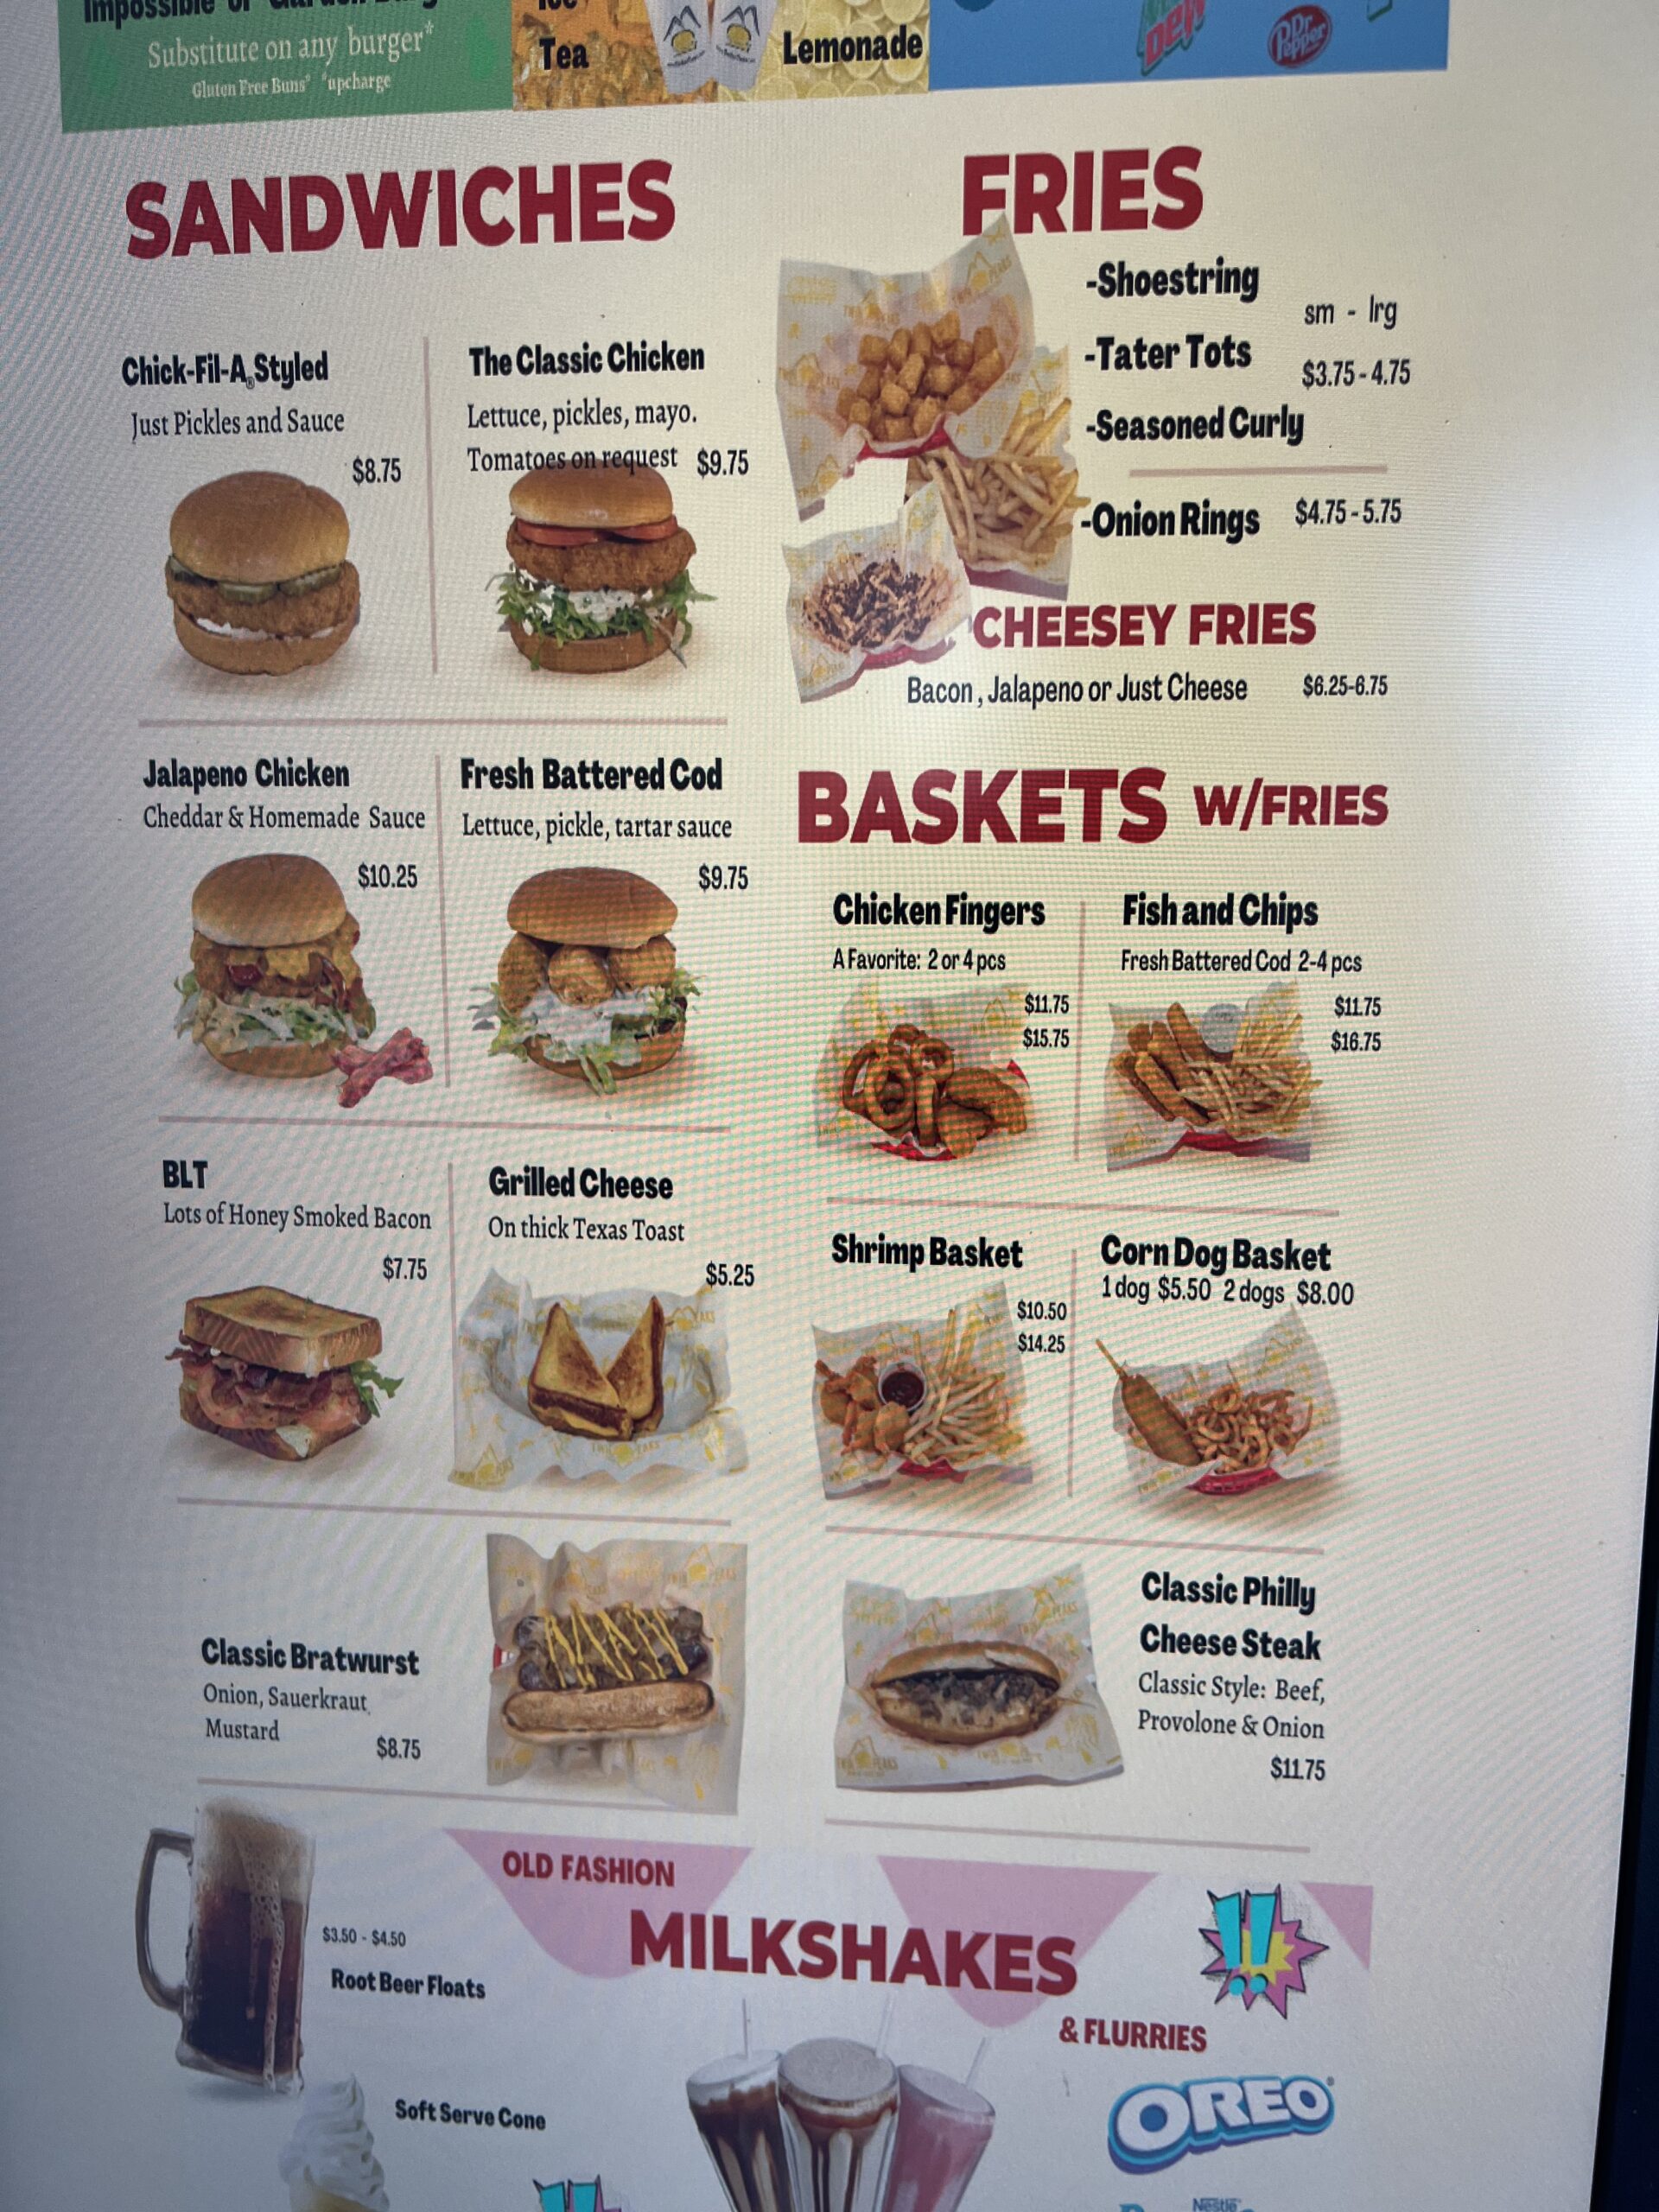 Sandwiches and fries menu at Twin Peaks in Hood River